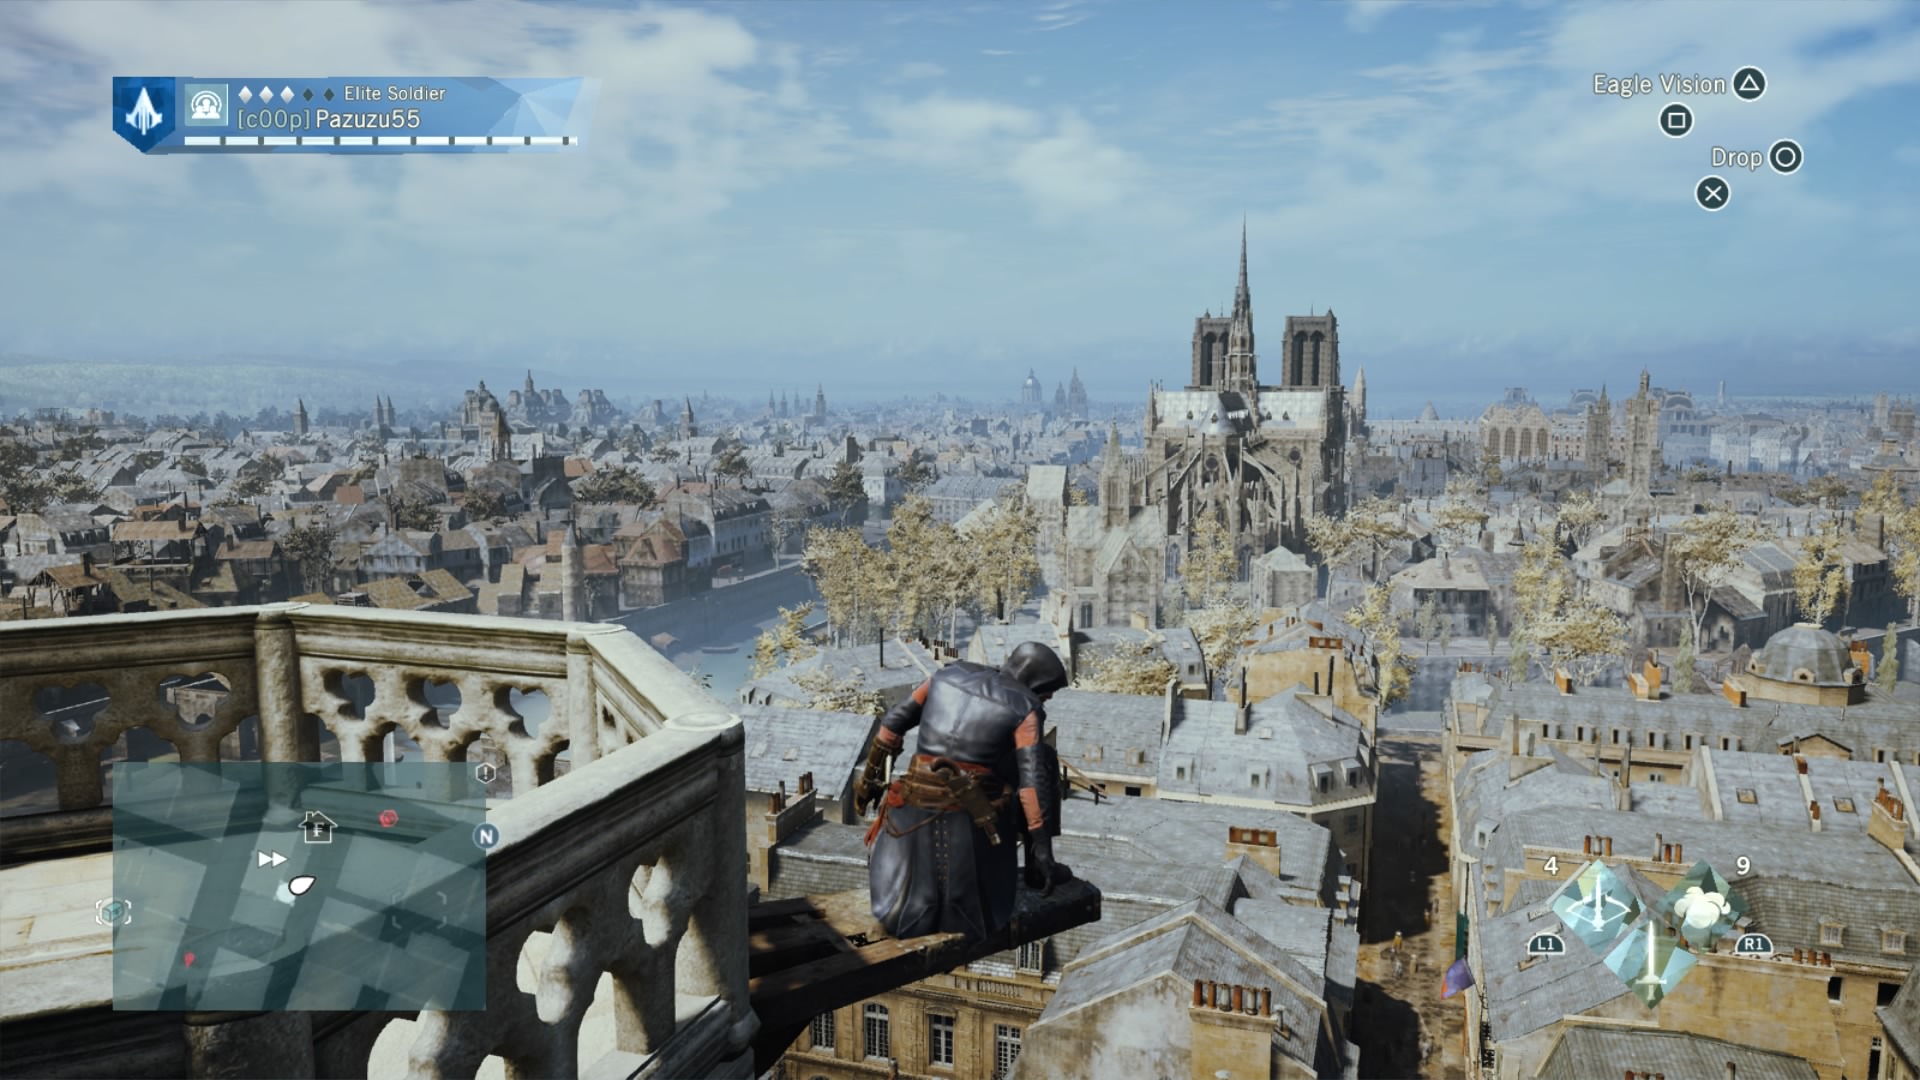 Co-Optimus - Review - Assassin's Creed Unity Co-Op Review